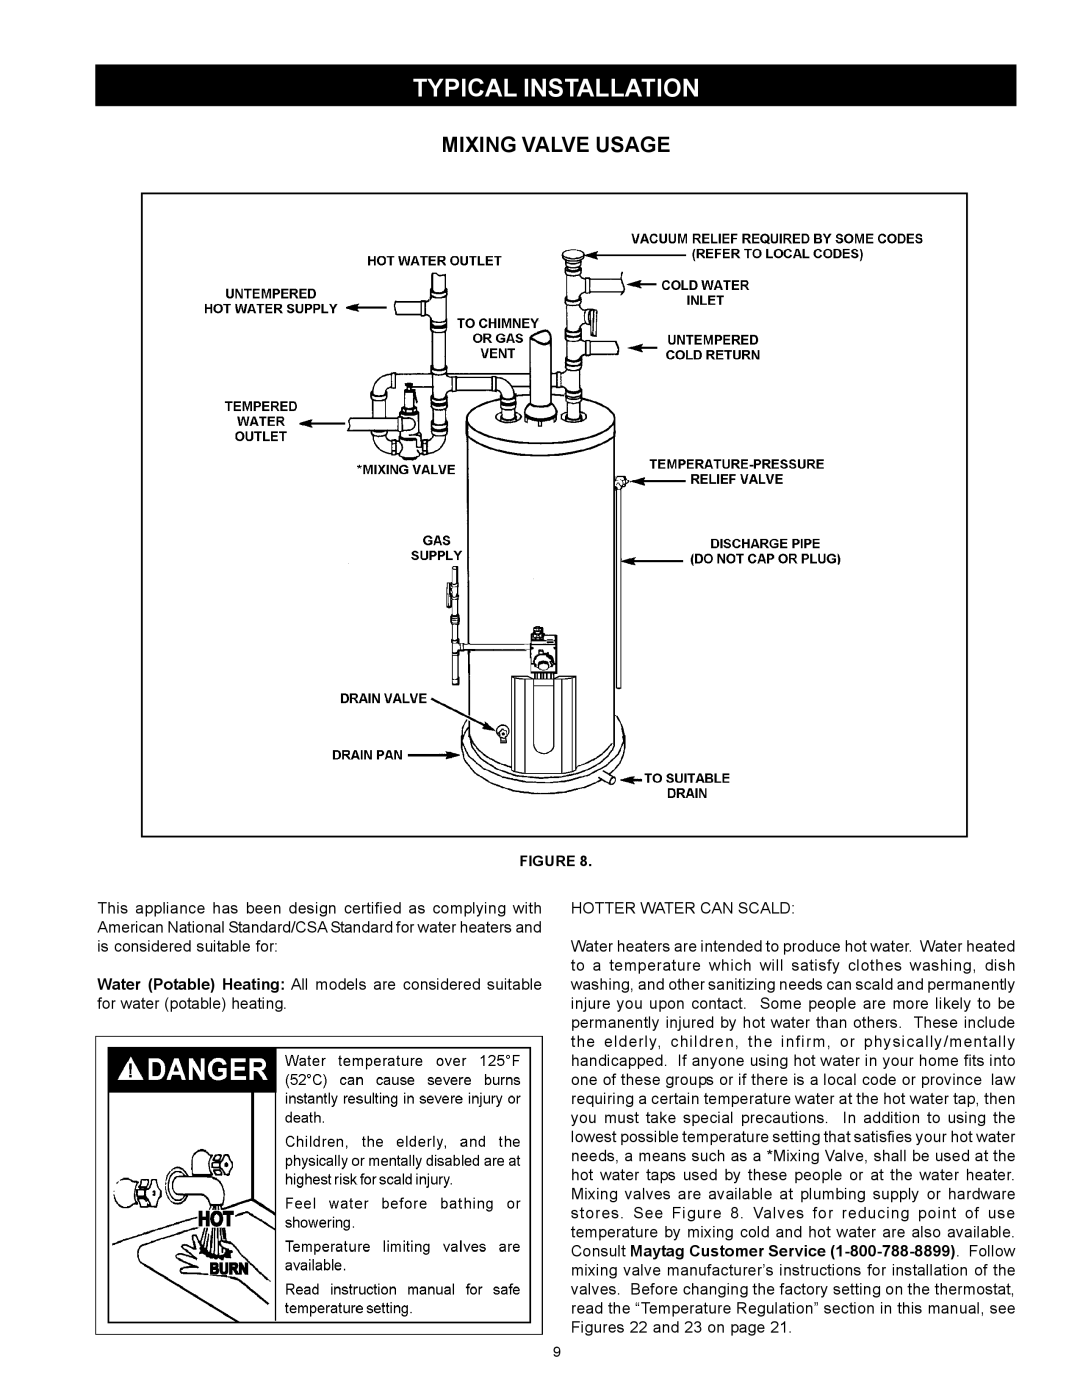 Maytag HXN4975S manual Mixing Valve Usage, Typical Installation 